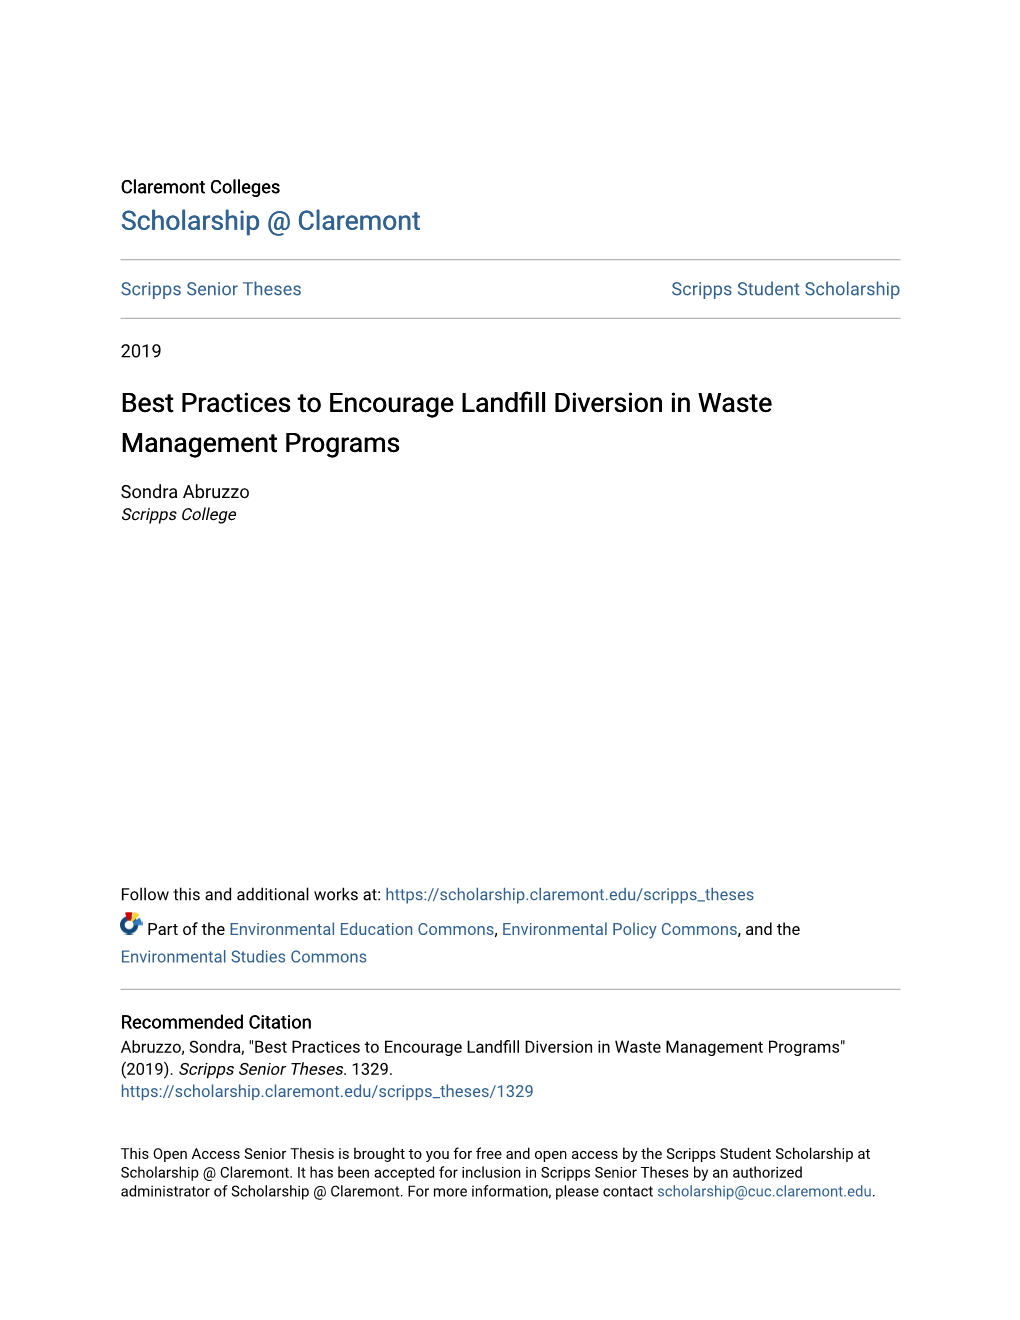 Best Practices to Encourage Landfill Diversion in Waste Management Programs